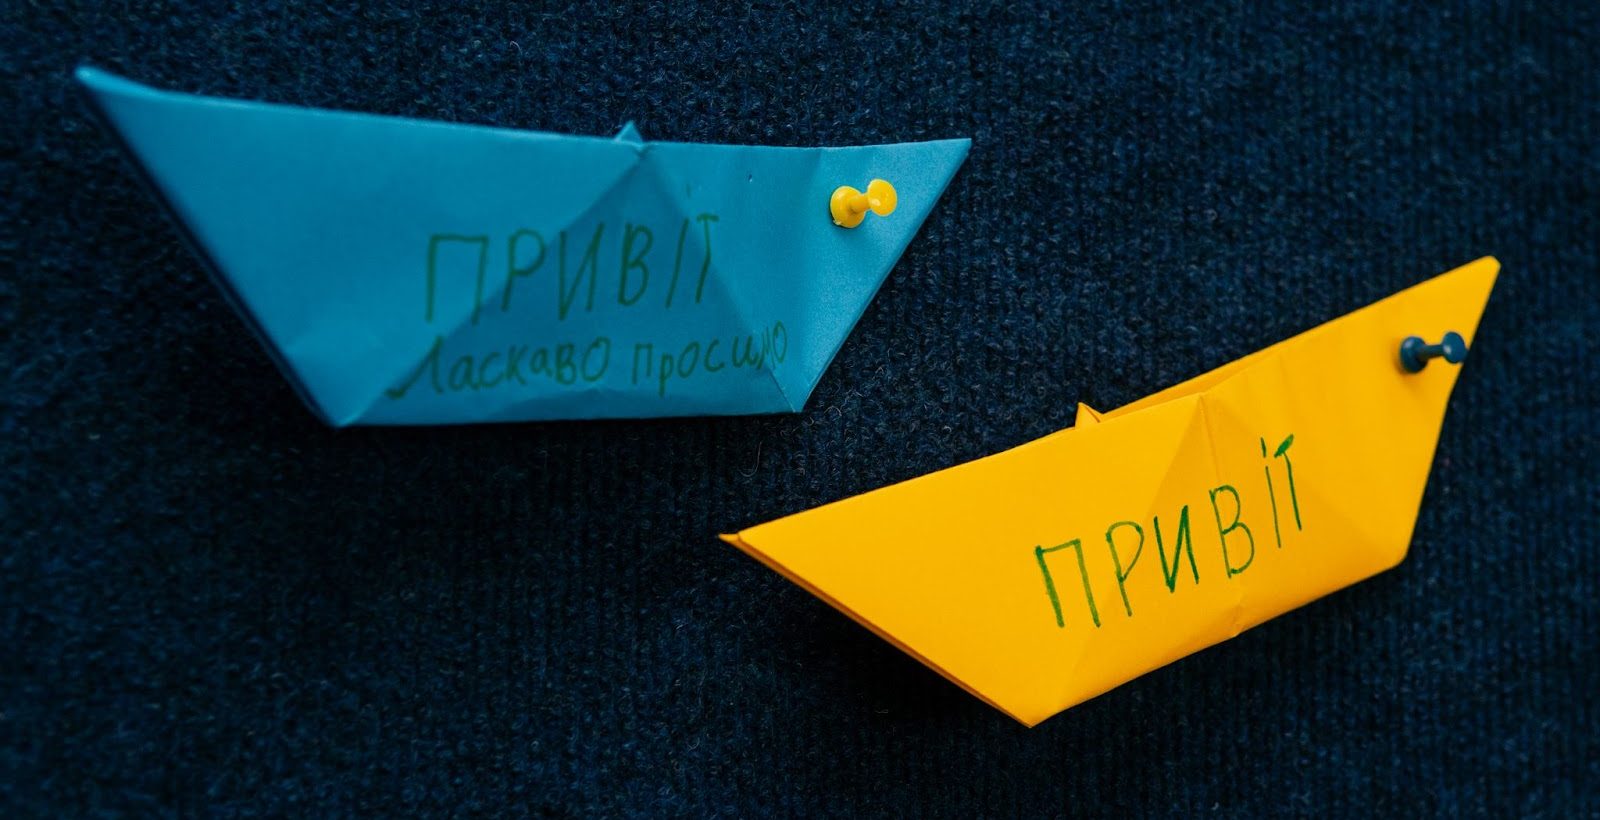 Paper boats with Hello written on them in Ukrainian